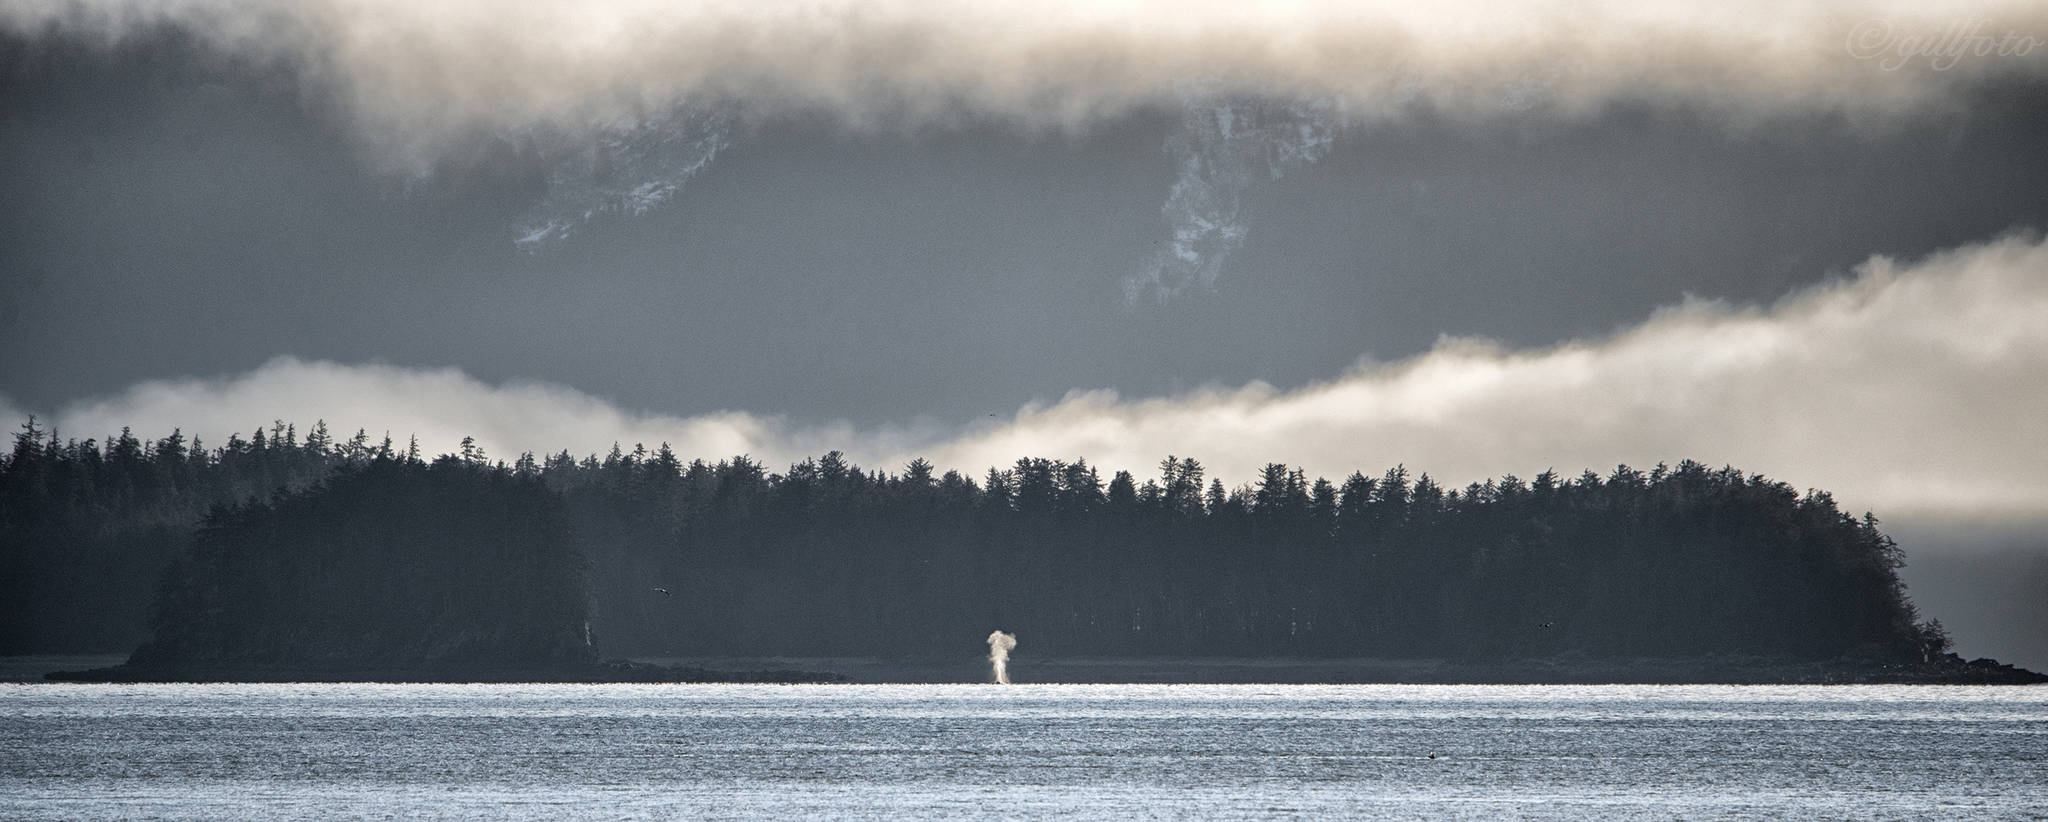 Humpback Whale blows over by Outer Point, Douglas Island on Dec. 9. (Courtesy Photo / Kenneth Gill, gillfoto)